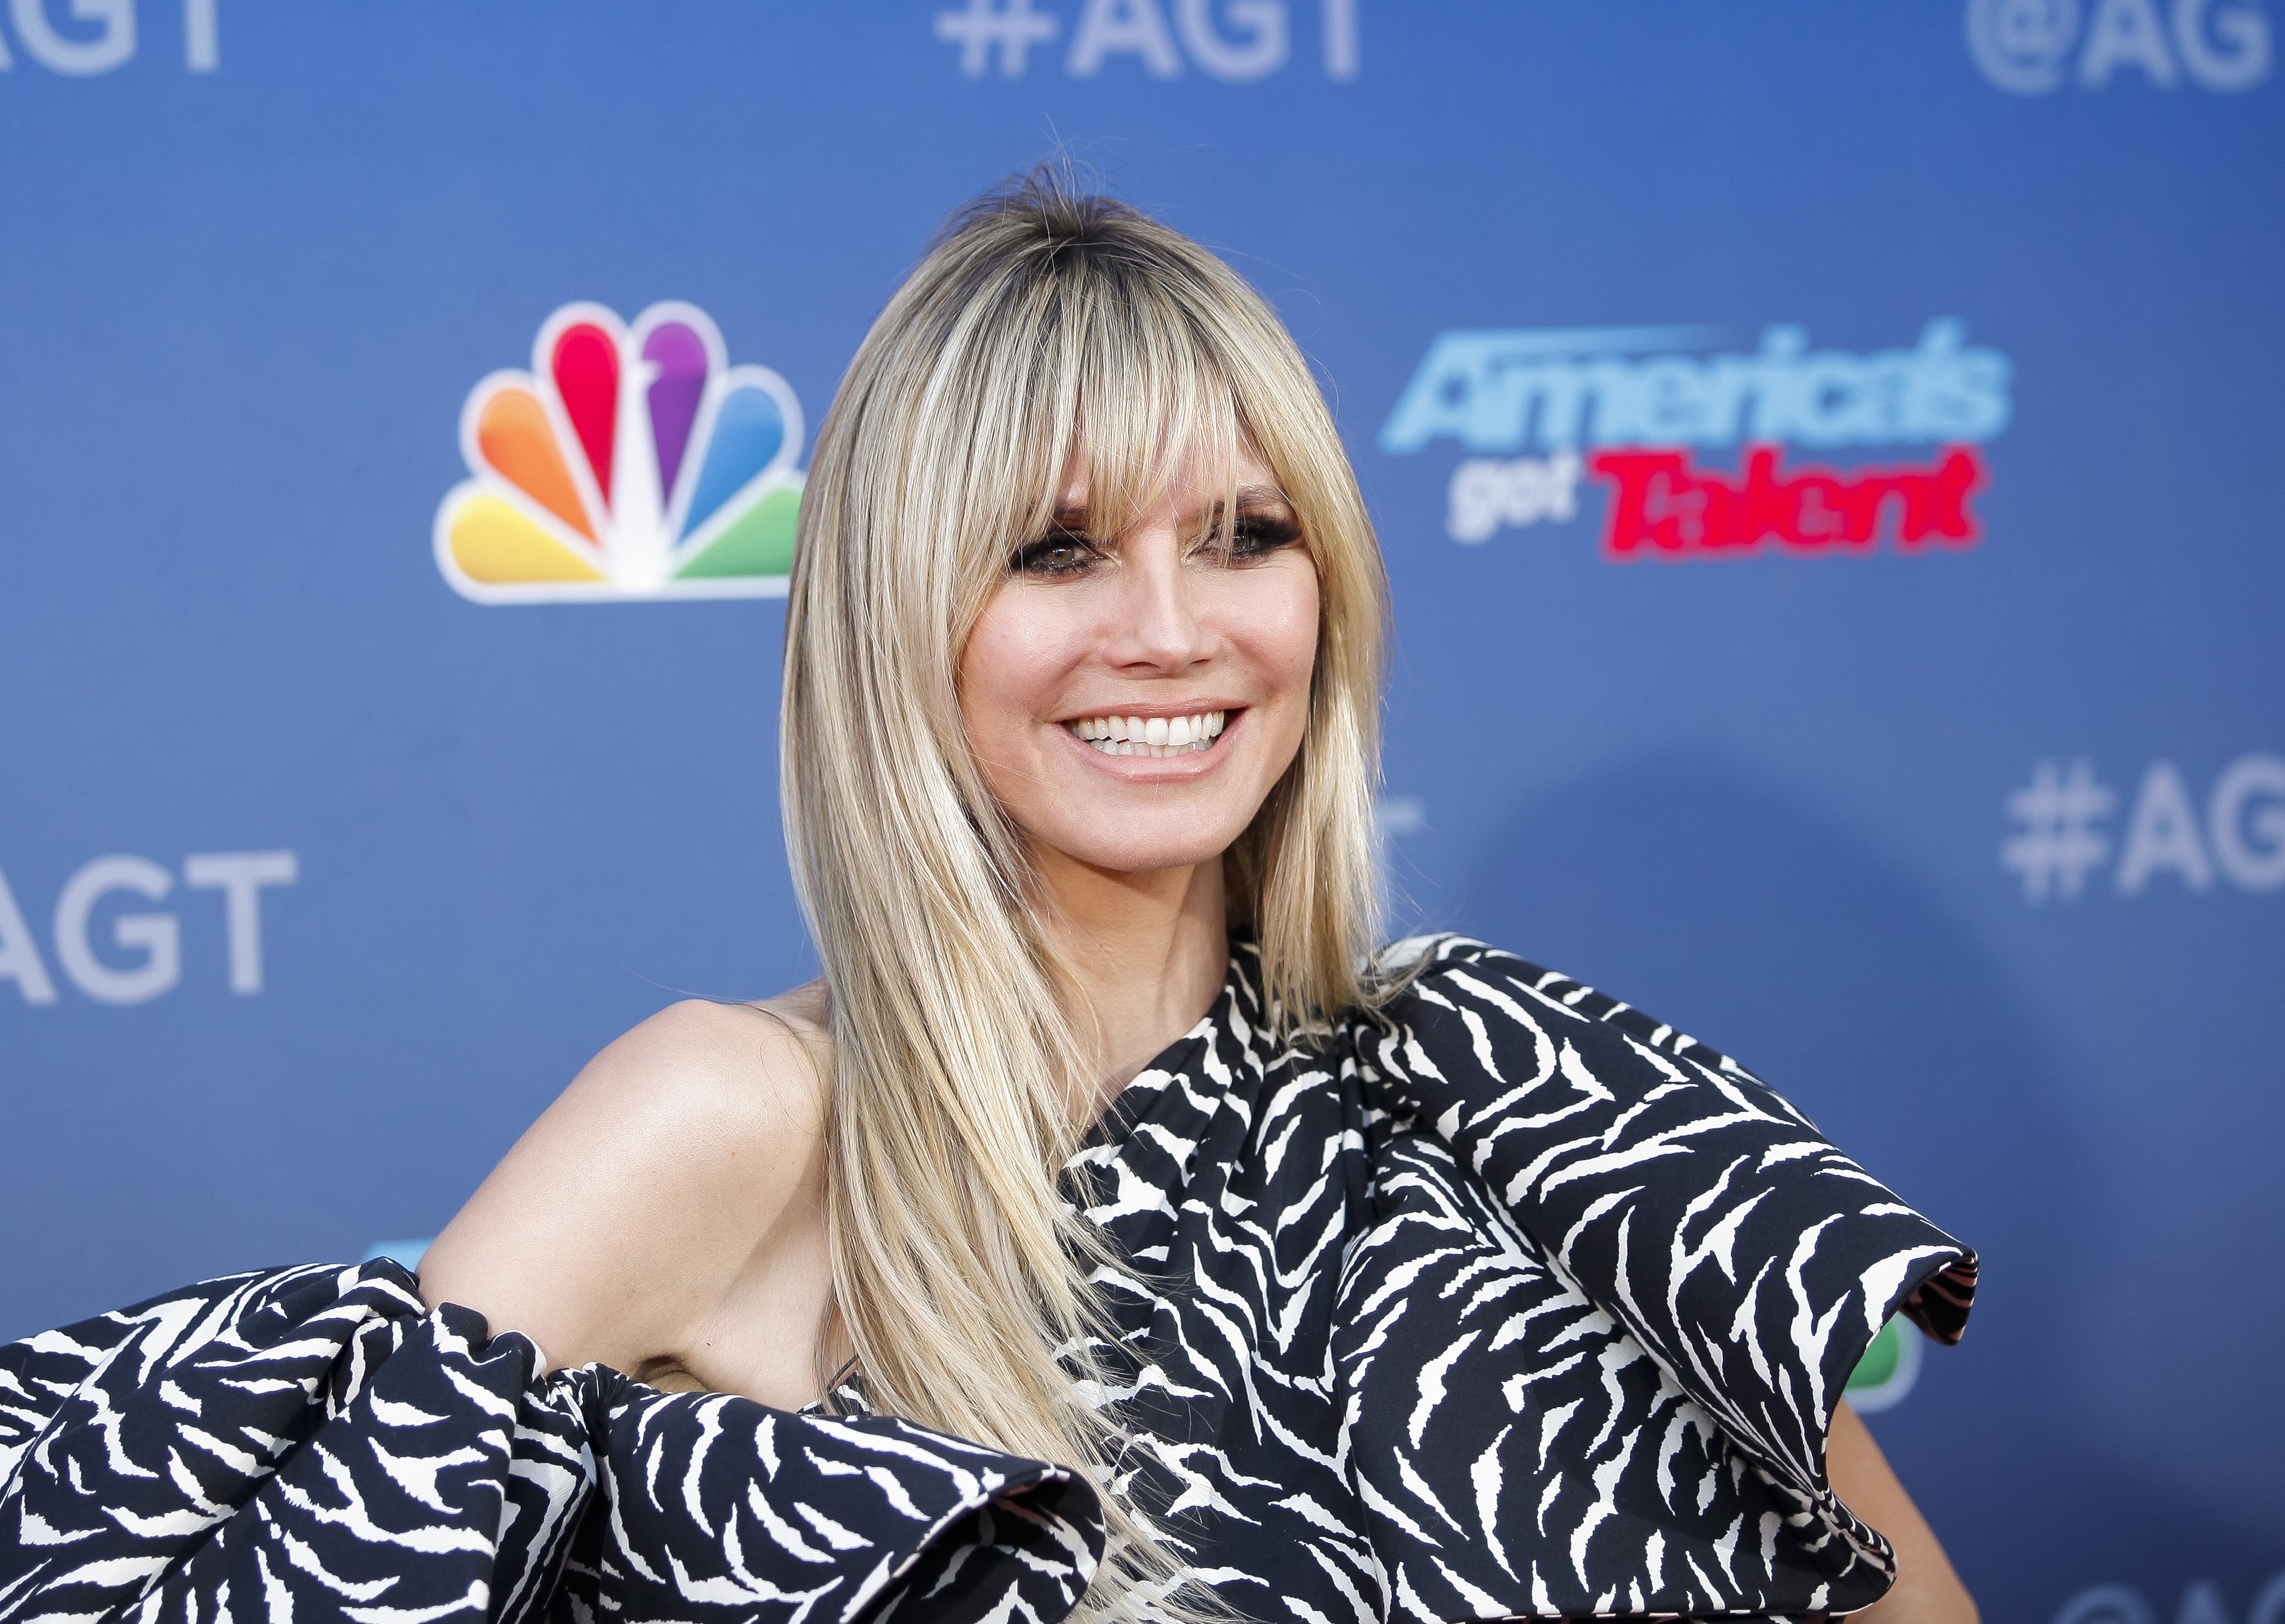 Heidi Klum attends season 15 of "America's Got Talent" in Pasadena, California on March 4, 2020 | Photo: Getty Images